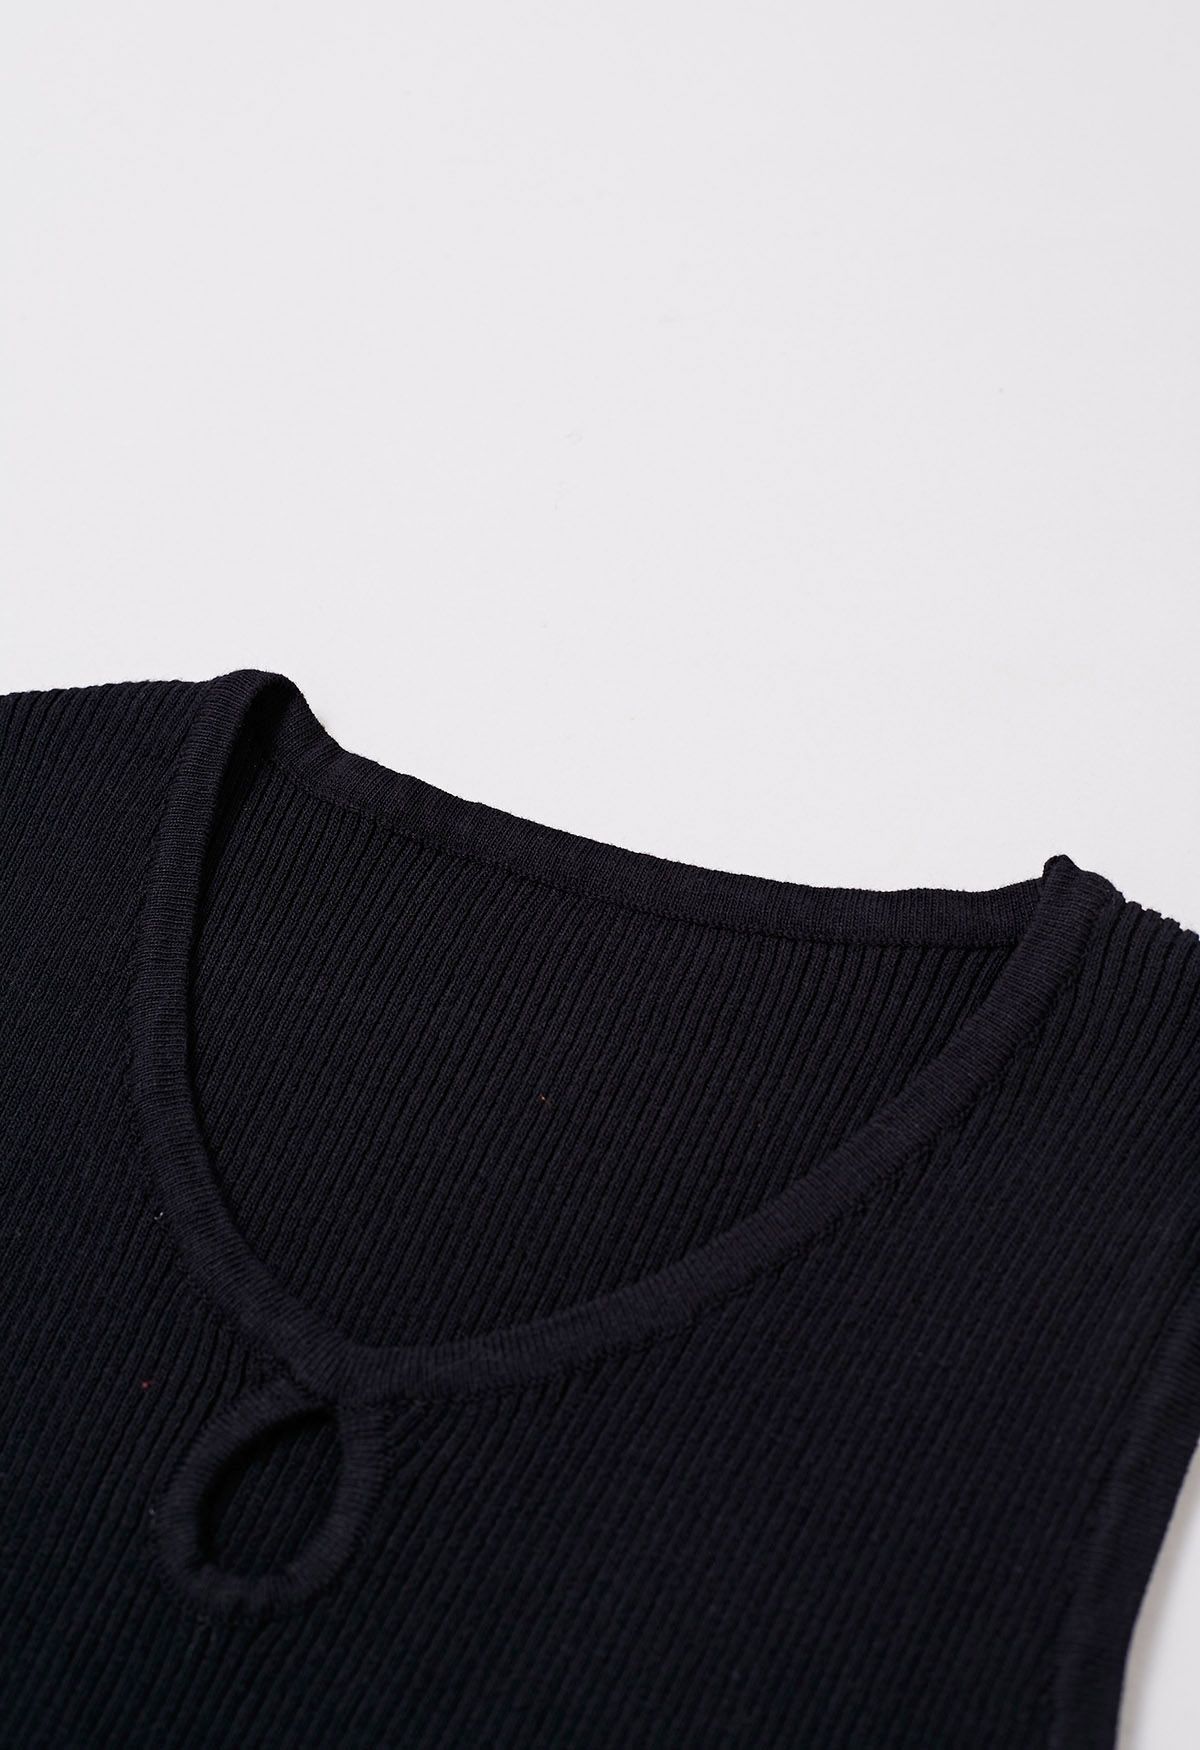 Cutout Detailing Sleeveless Knit Top in Black